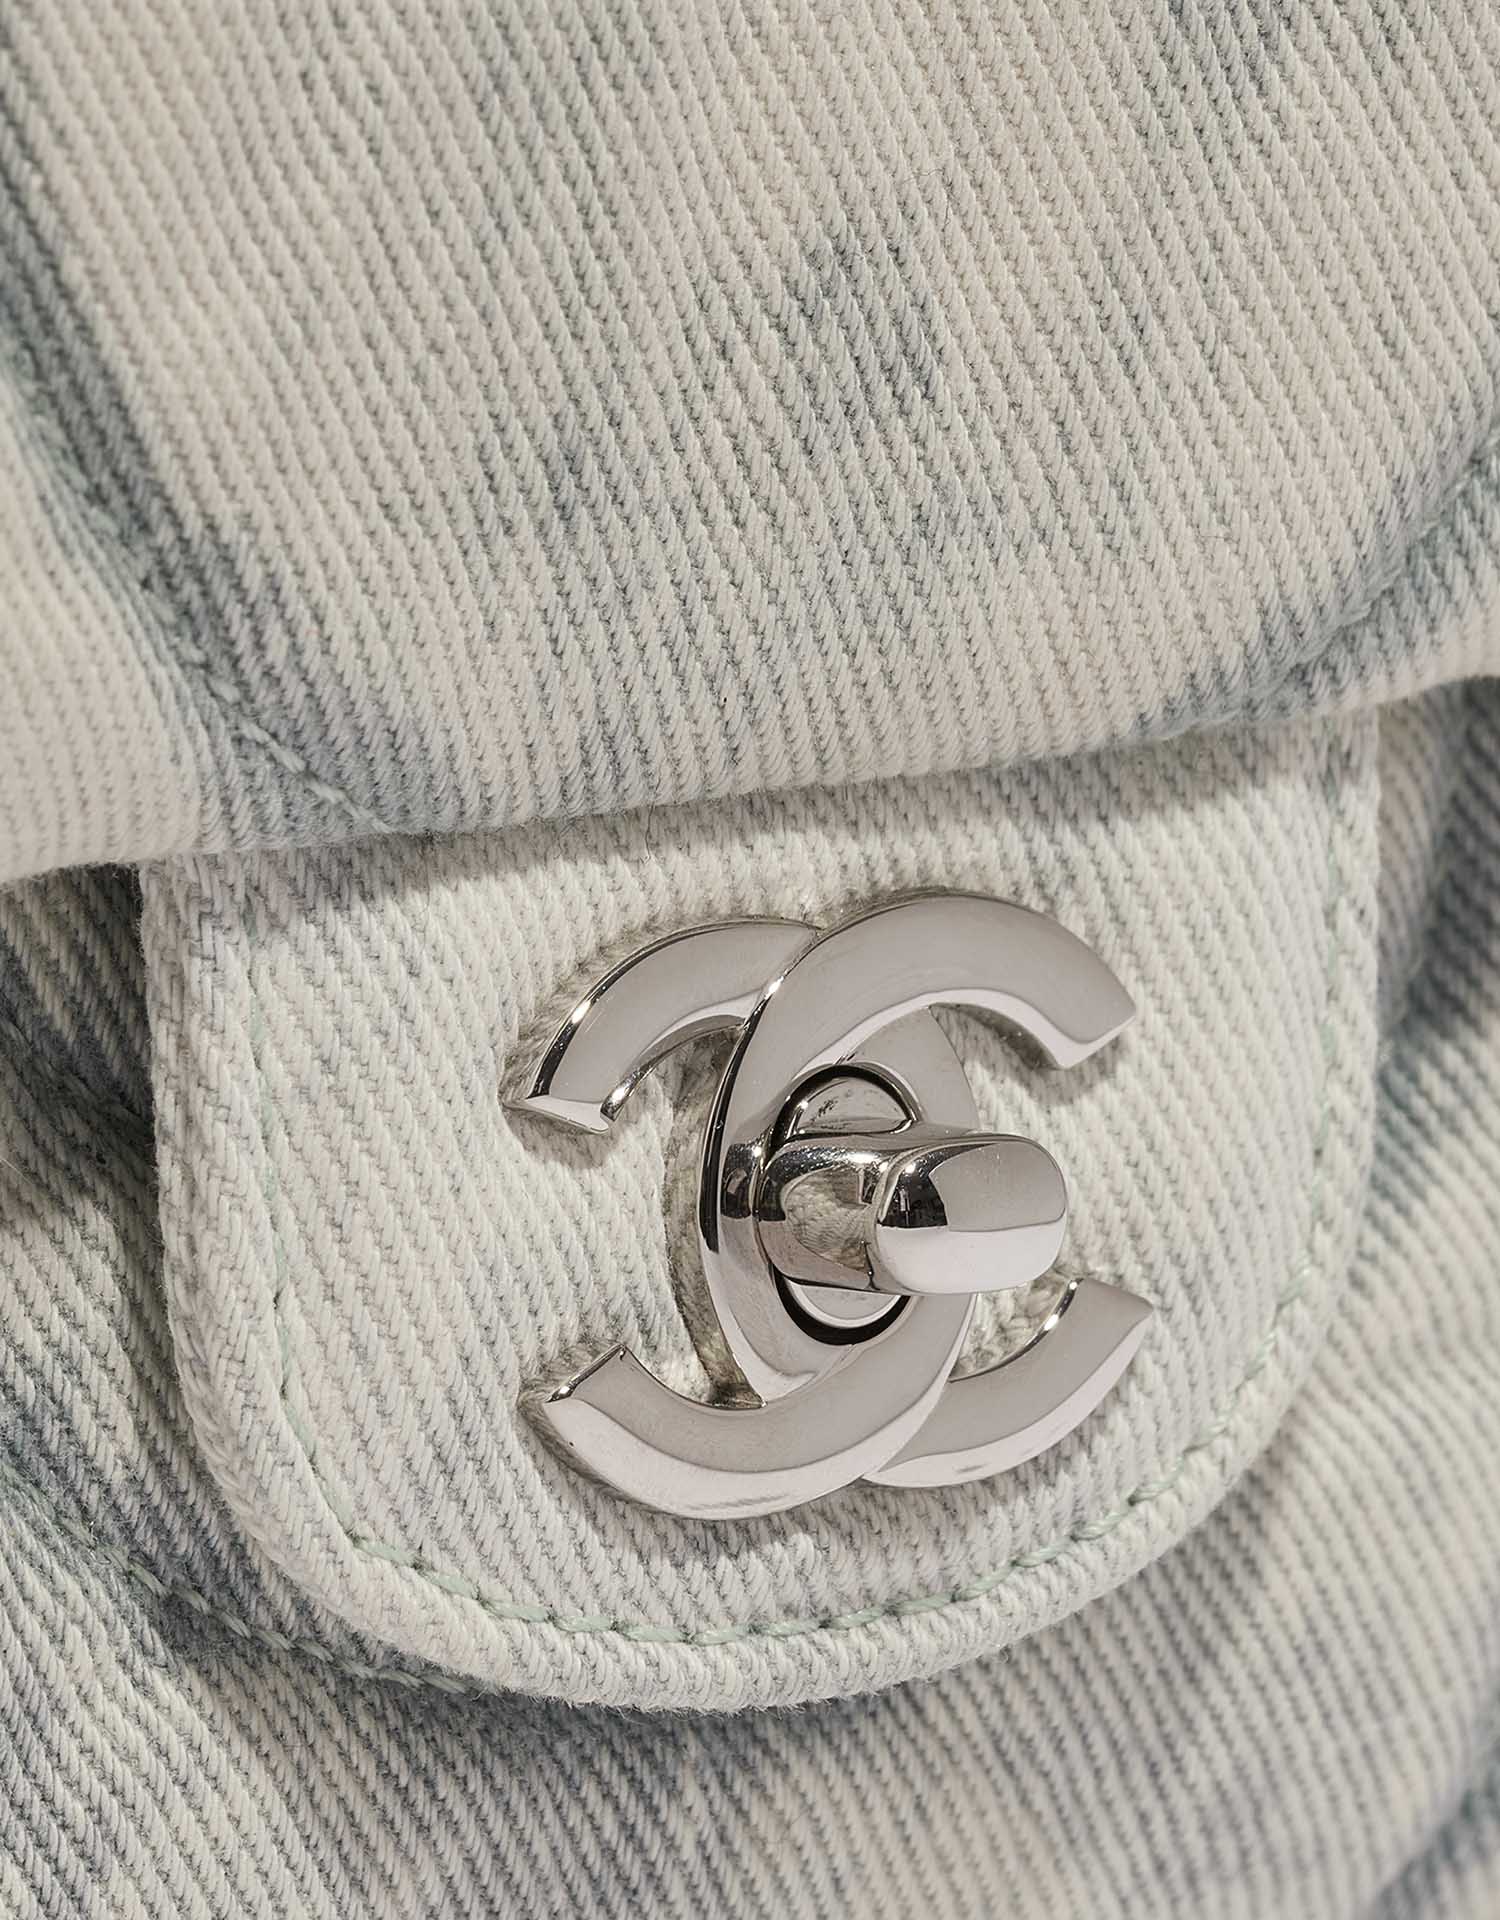 CHANEL 22P Blue Denim Small Flap Bag *New - Timeless Luxuries